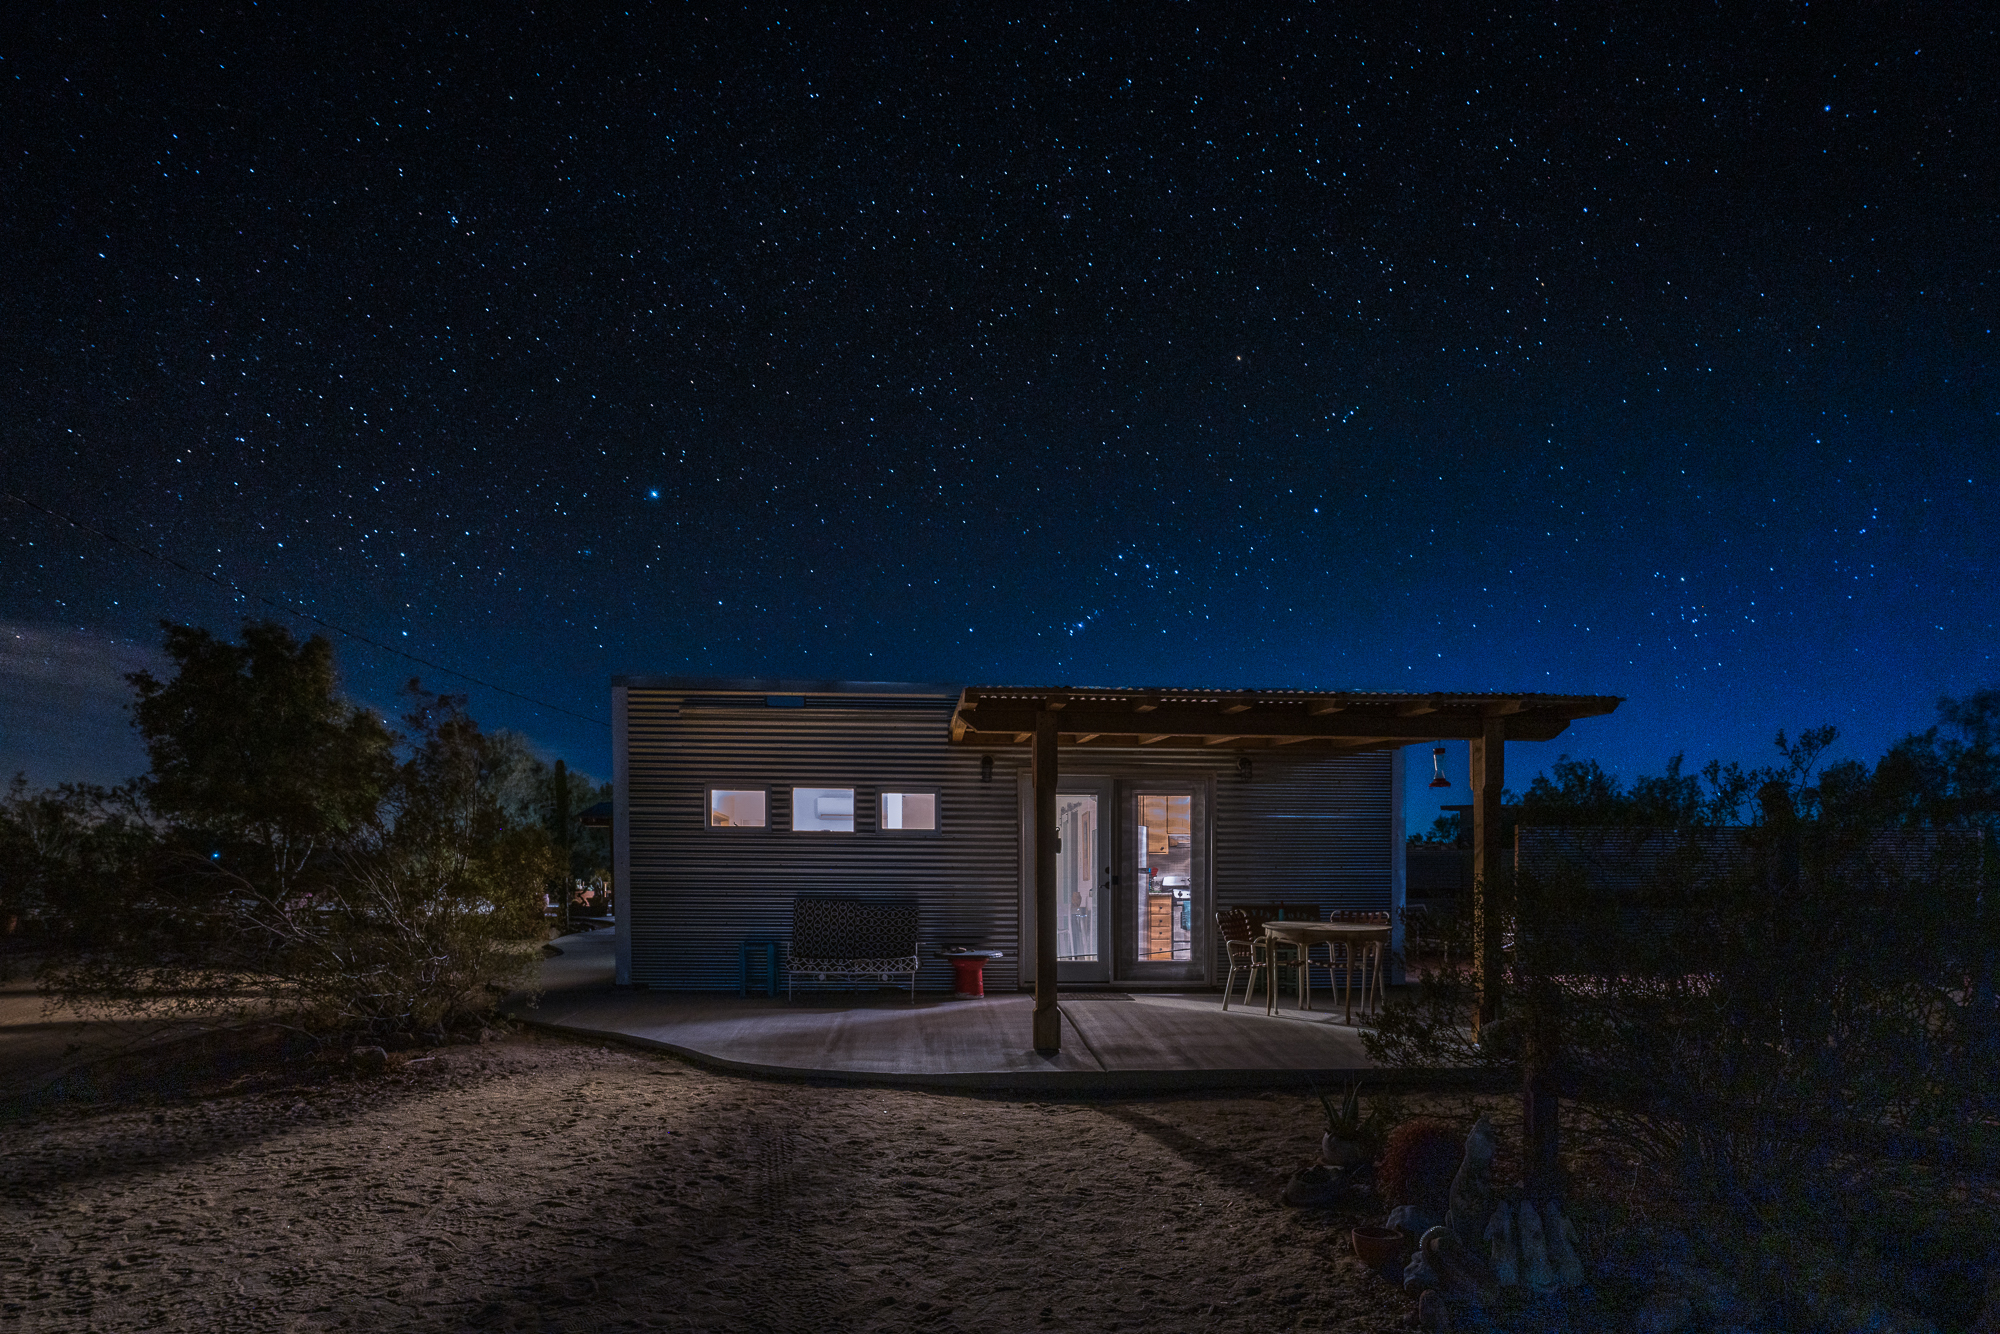 A cozy bungalow nestled in a desert setting at night, with a clear sky showcasing a plethora of stars.